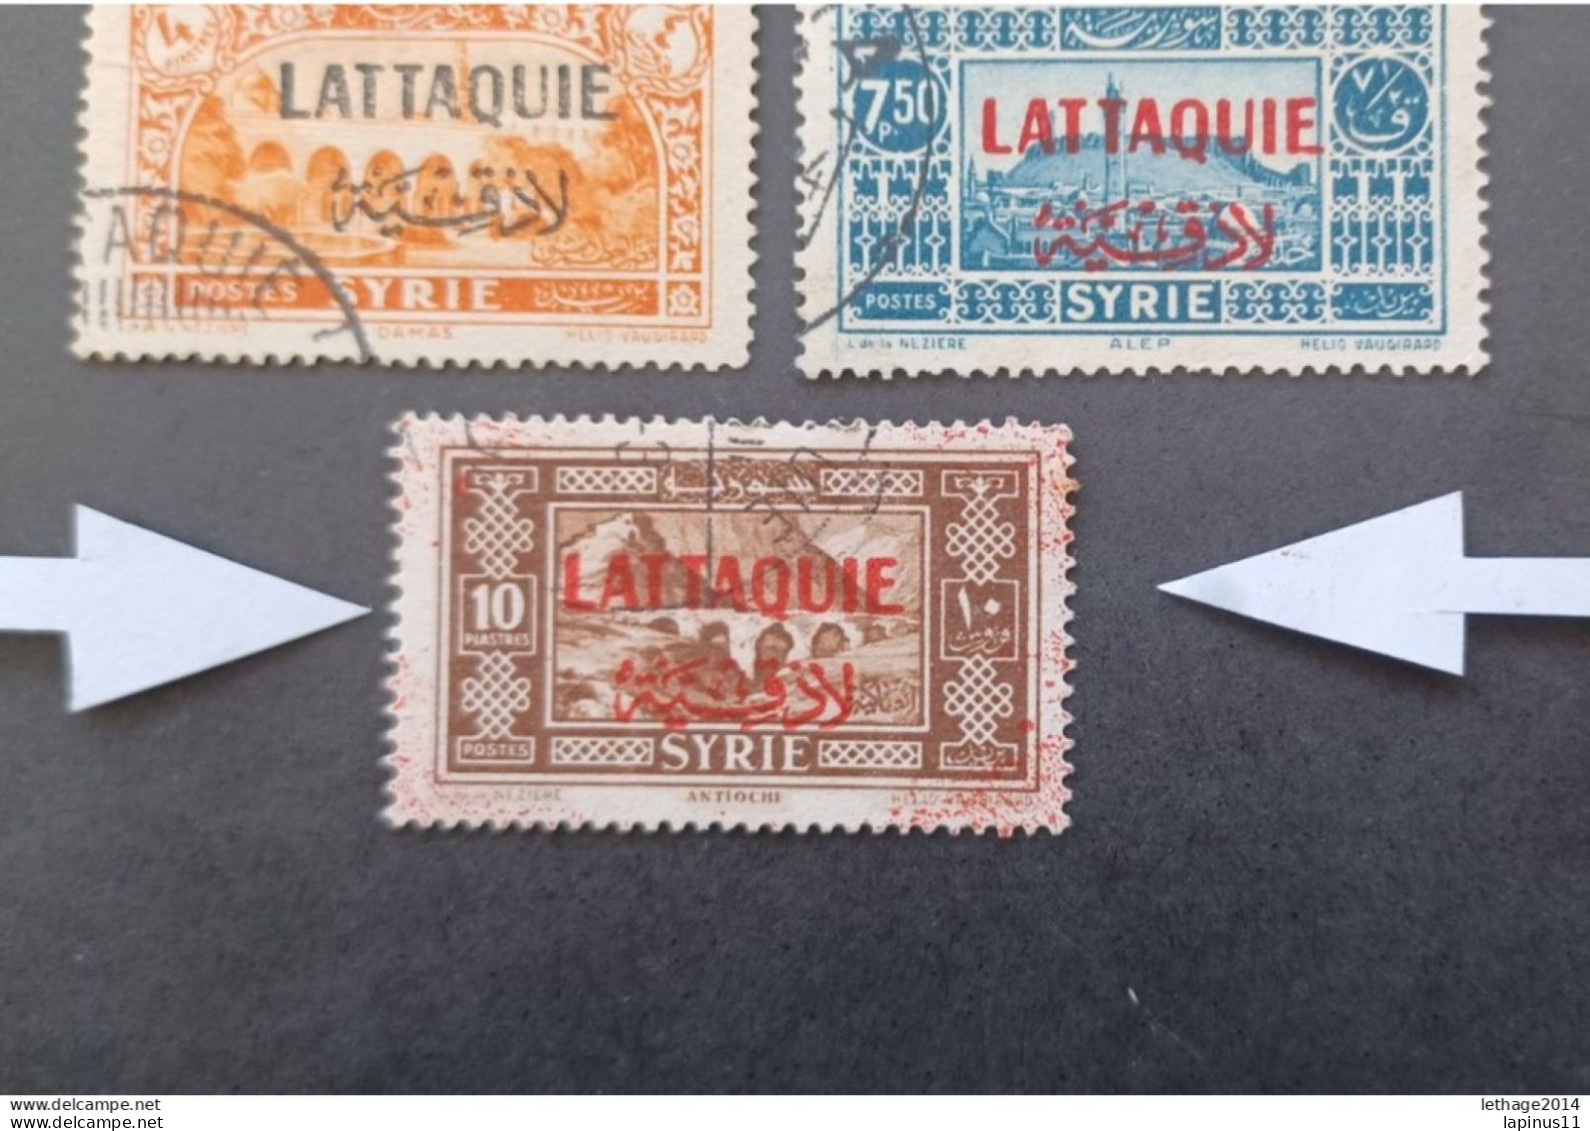 FRENCH OCCUPATION IN SYRIA LATTAQUIE 1940 STAMPS OF SYRIE DE 1930 IN OVERPRINT CAT YVERT N 1....15 RED STAINS - Oblitérés